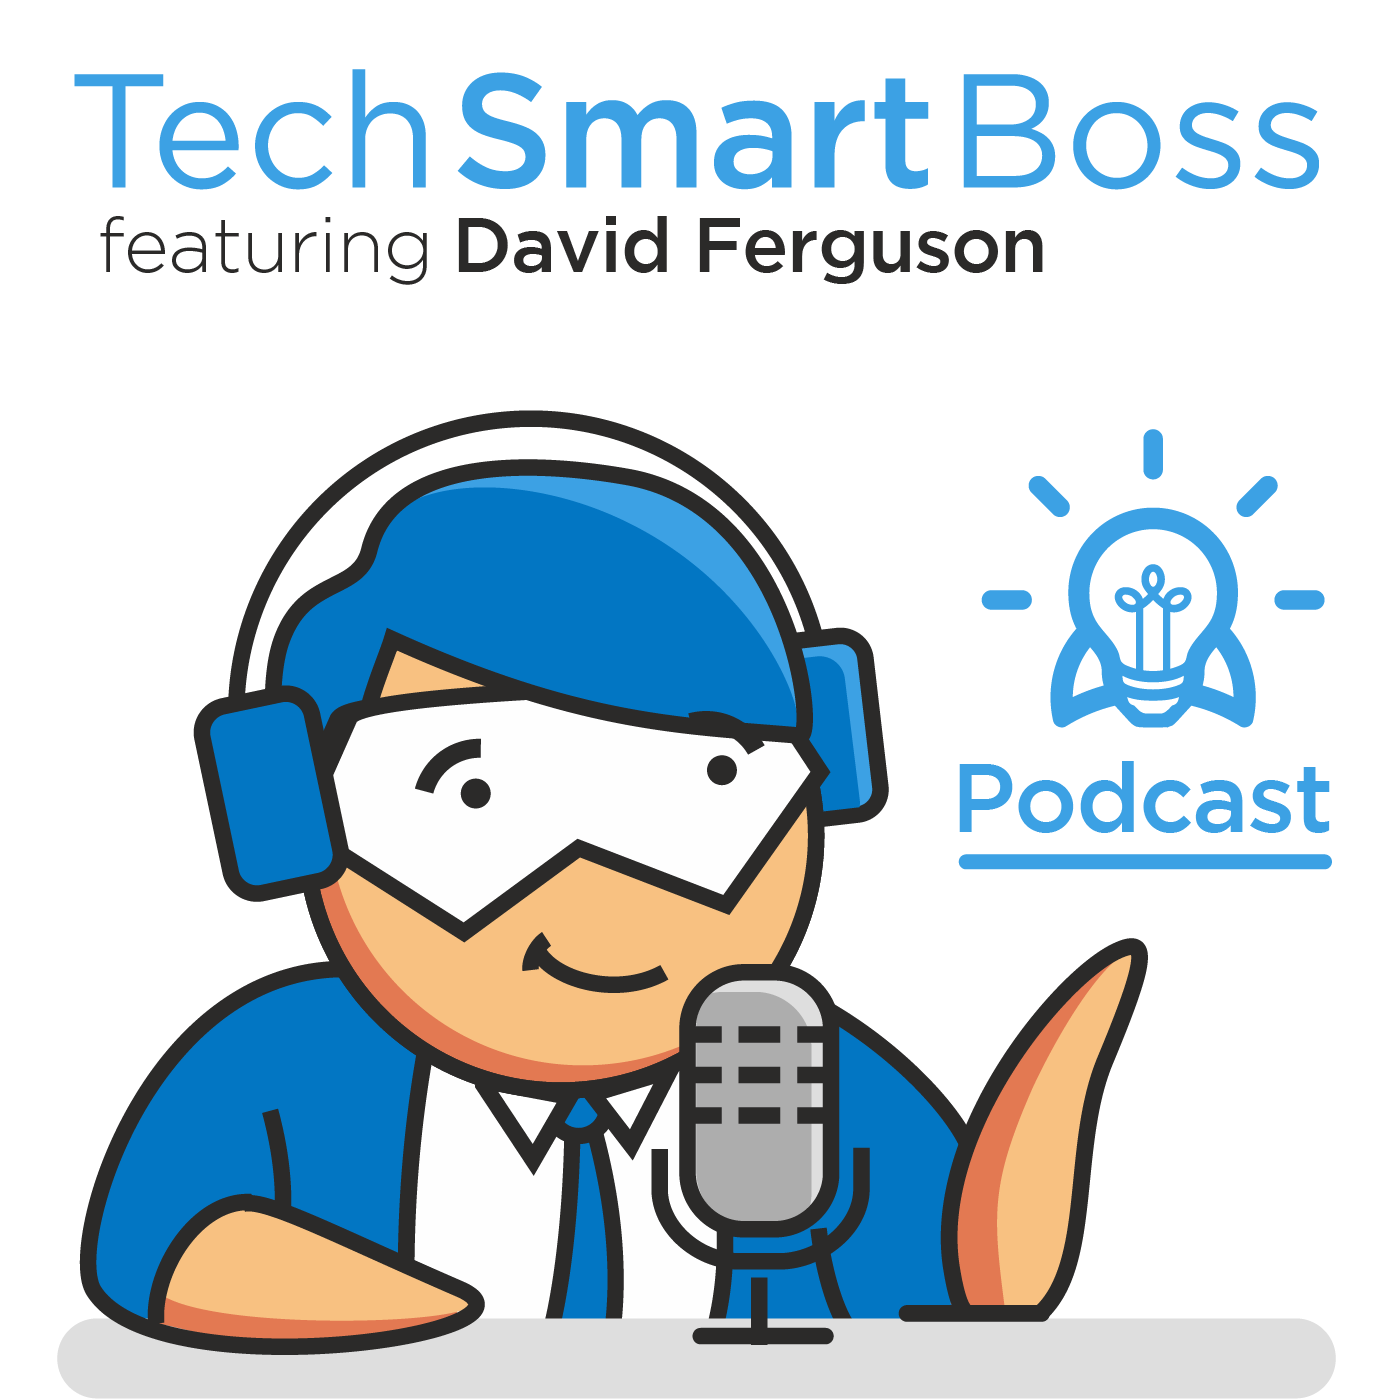 Episode 108: 14 Key Things To Do To Optimize Your Content for SEO (The Tech Smart Boss Way)